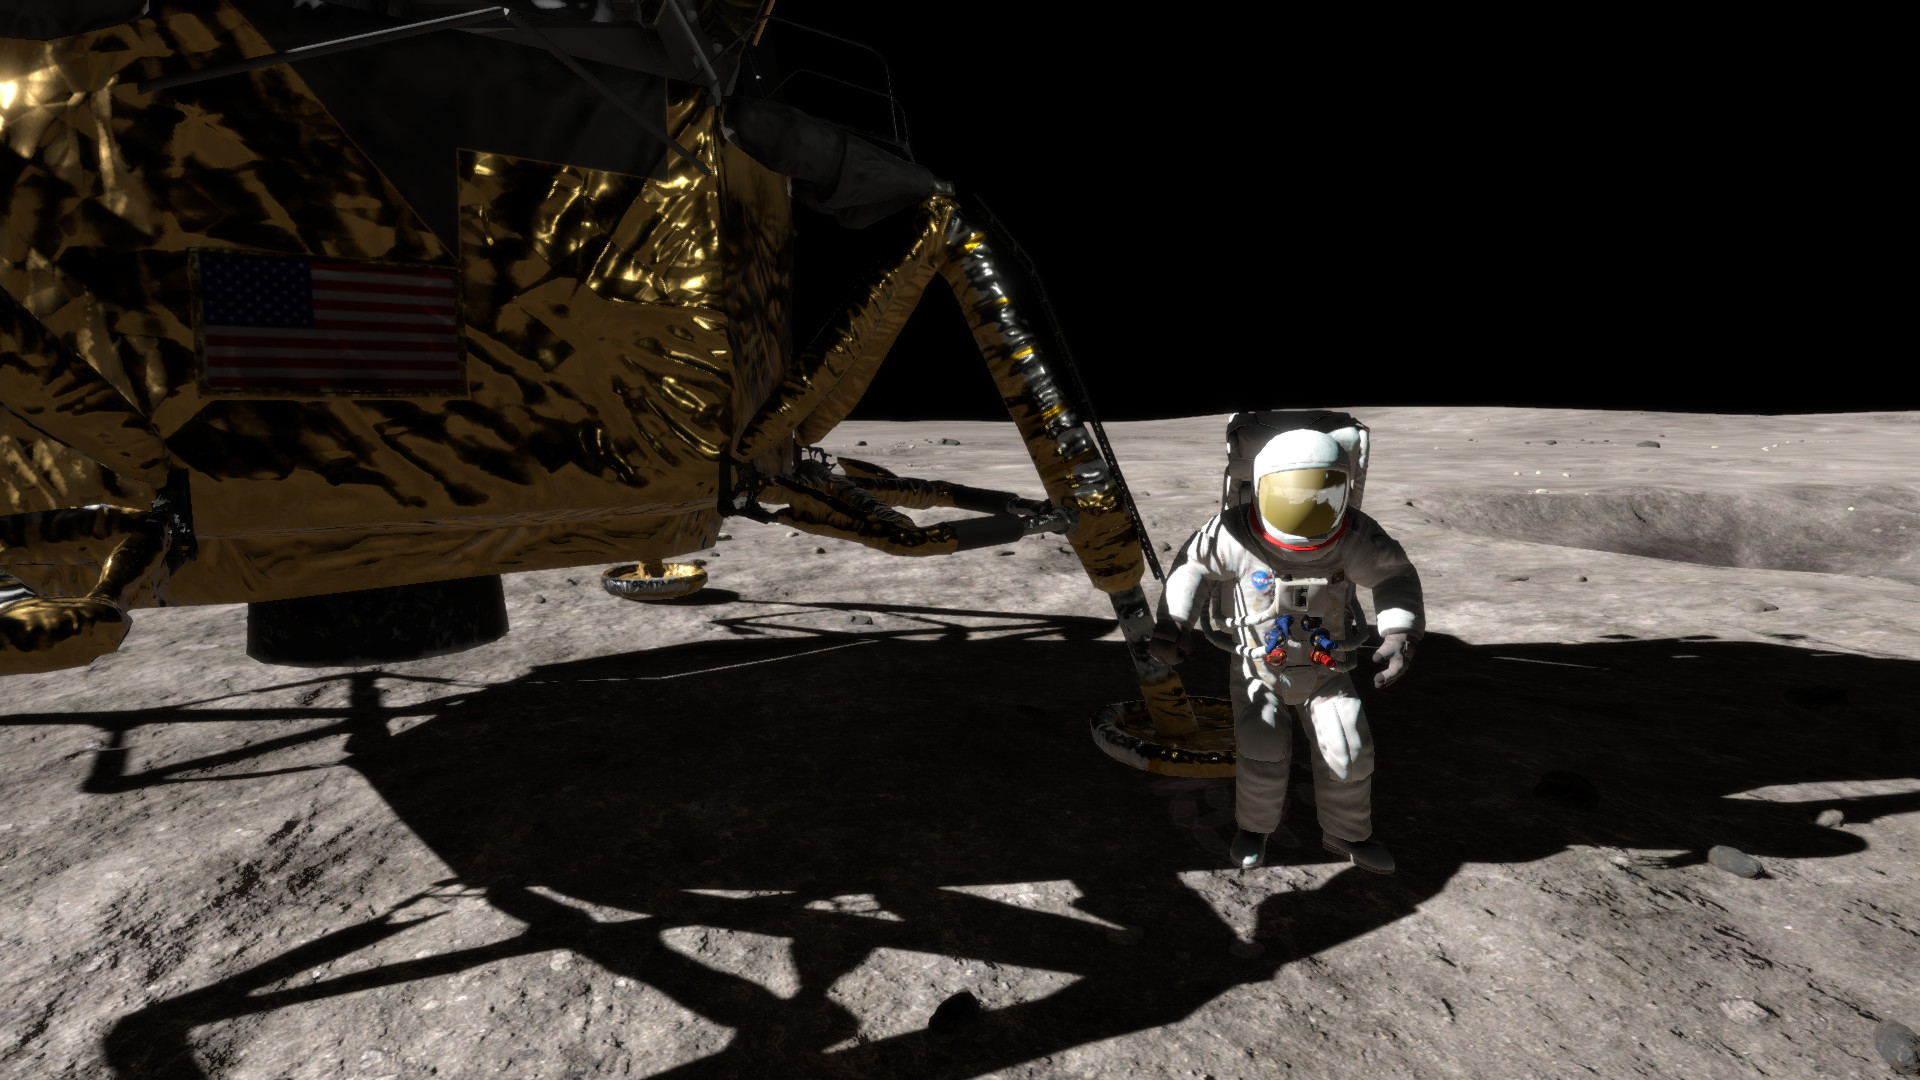 <p>One of the best things about VR is that it doesn’t limit where you can go. For example, you can check out the historic Apollo 11 moon landing in VR, complete with stunning visuals and audio recordings from the mission.</p><p>You can be right there, walking on the moon during this historic event. The experience can be downloaded from Steam.</p>